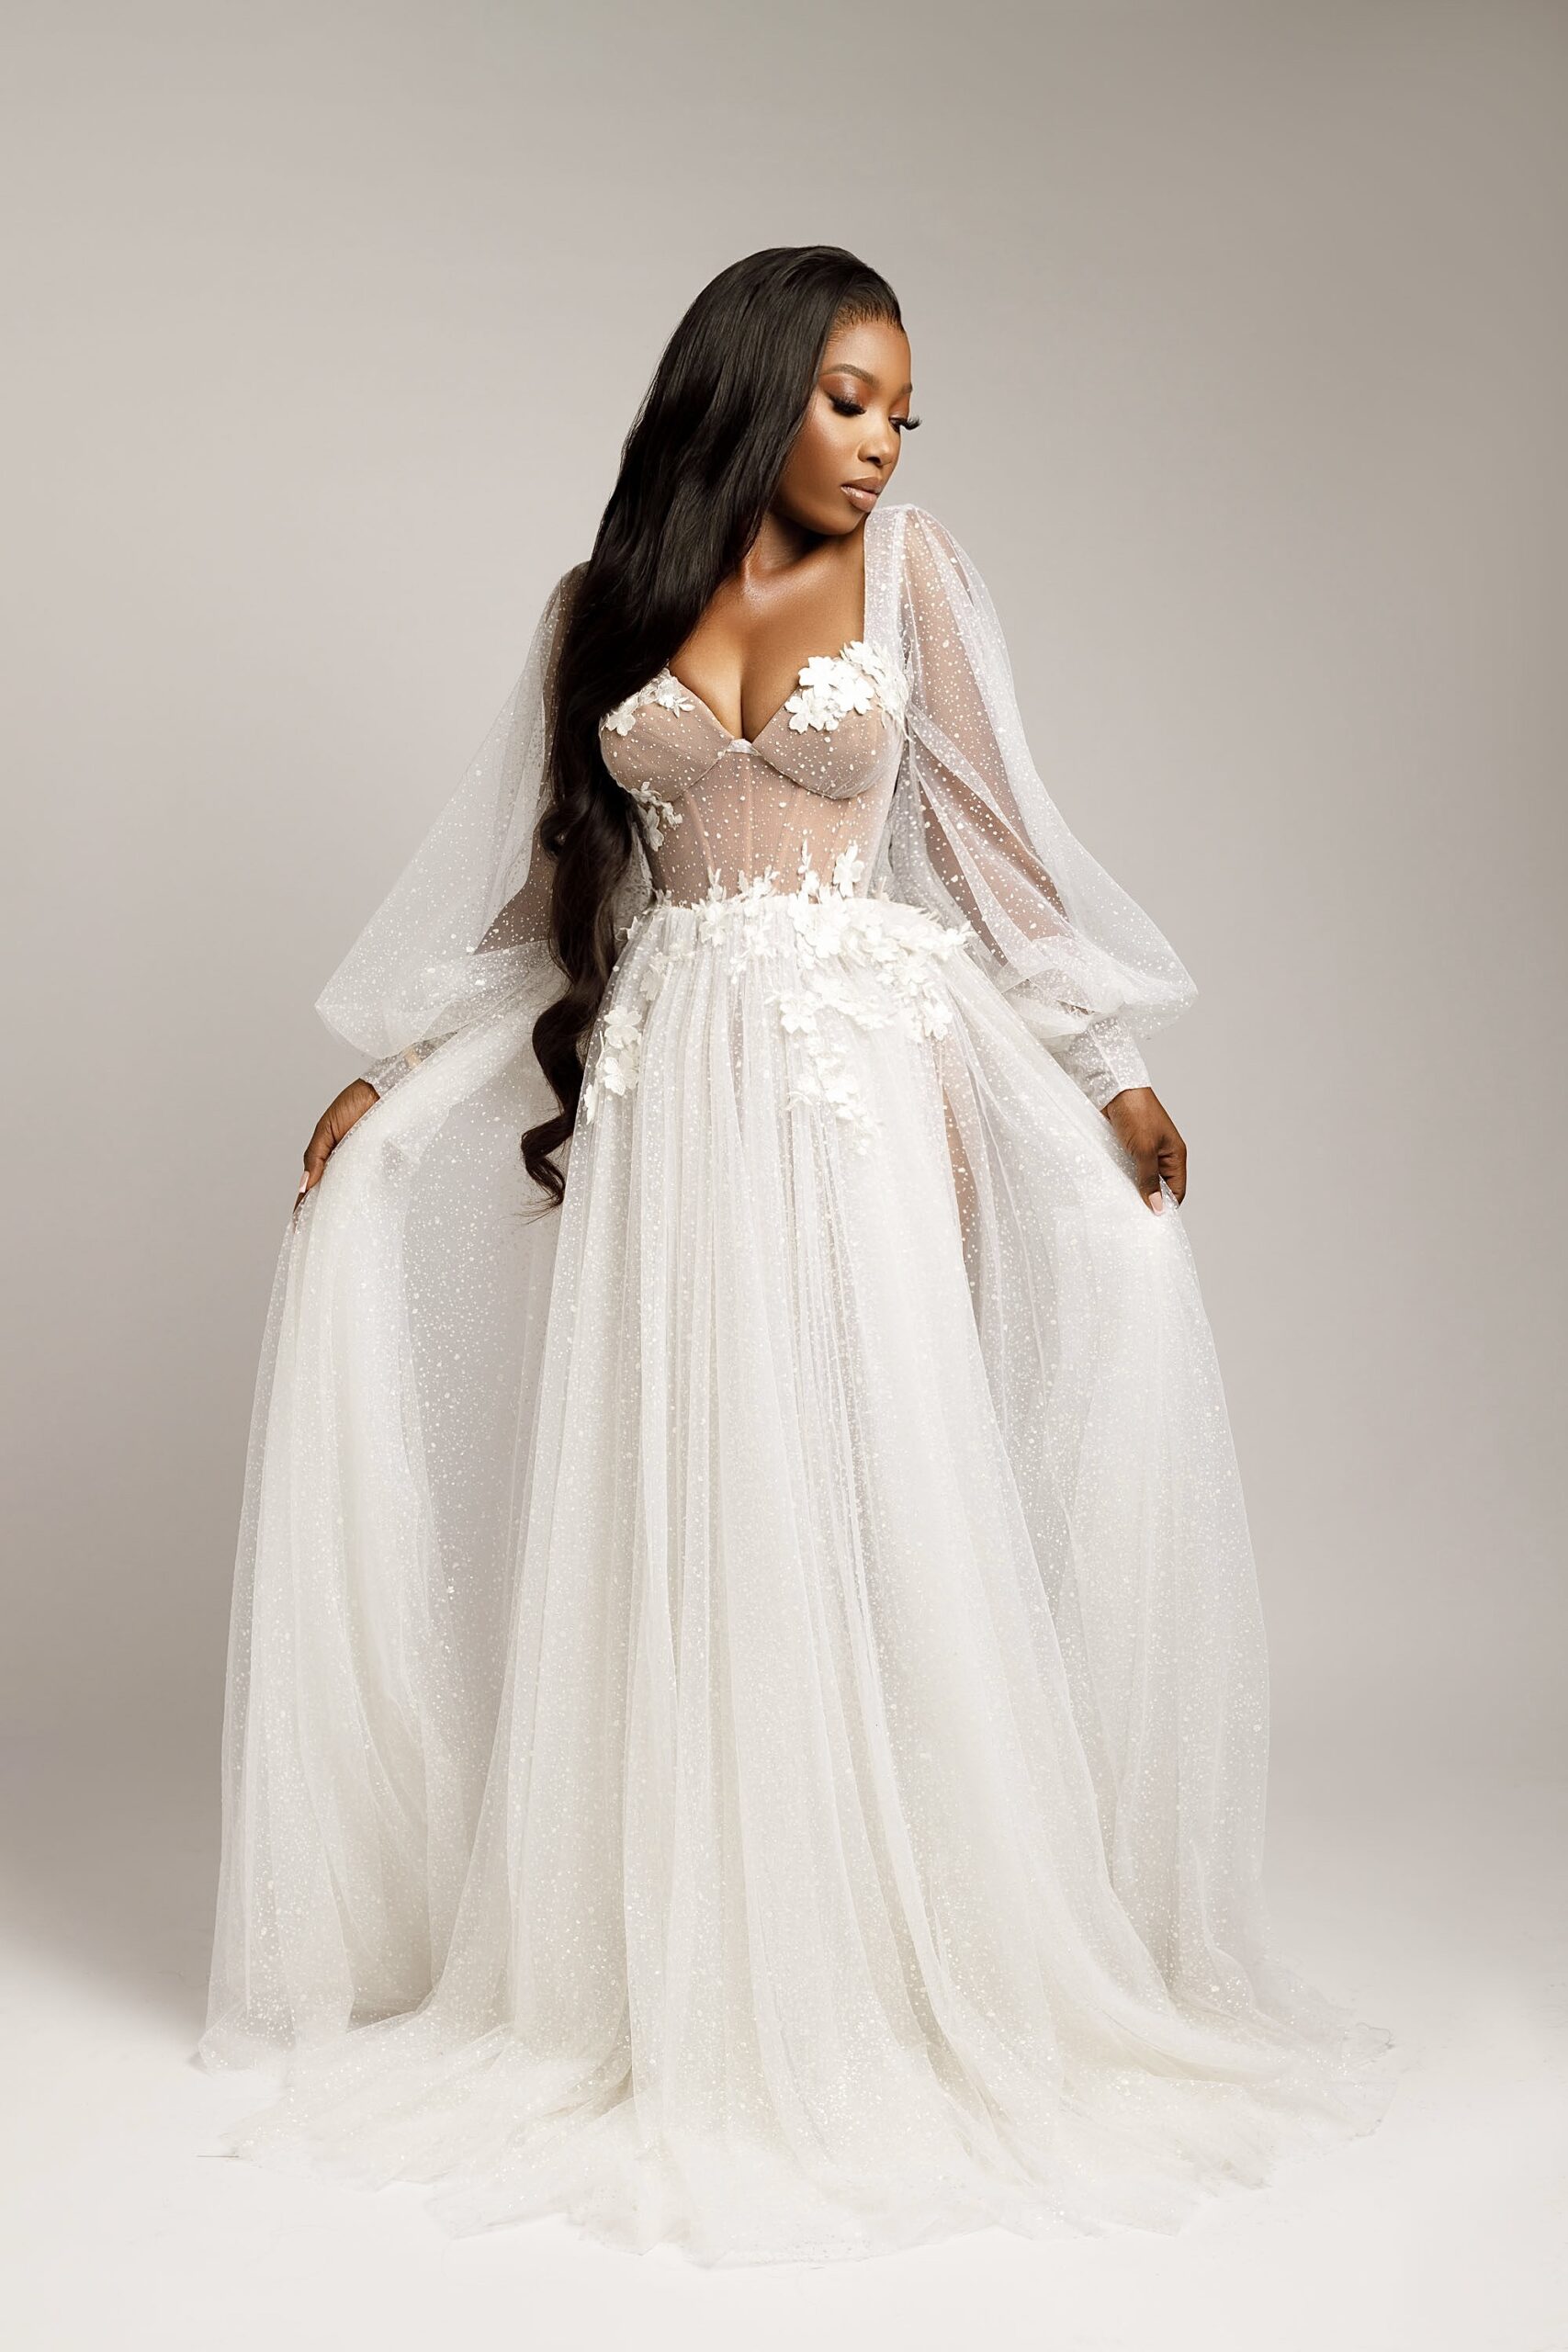 Your Wedding Morning Just Got Better With This Bridal Robe Collection by Veekee James & Hair by Adefunke